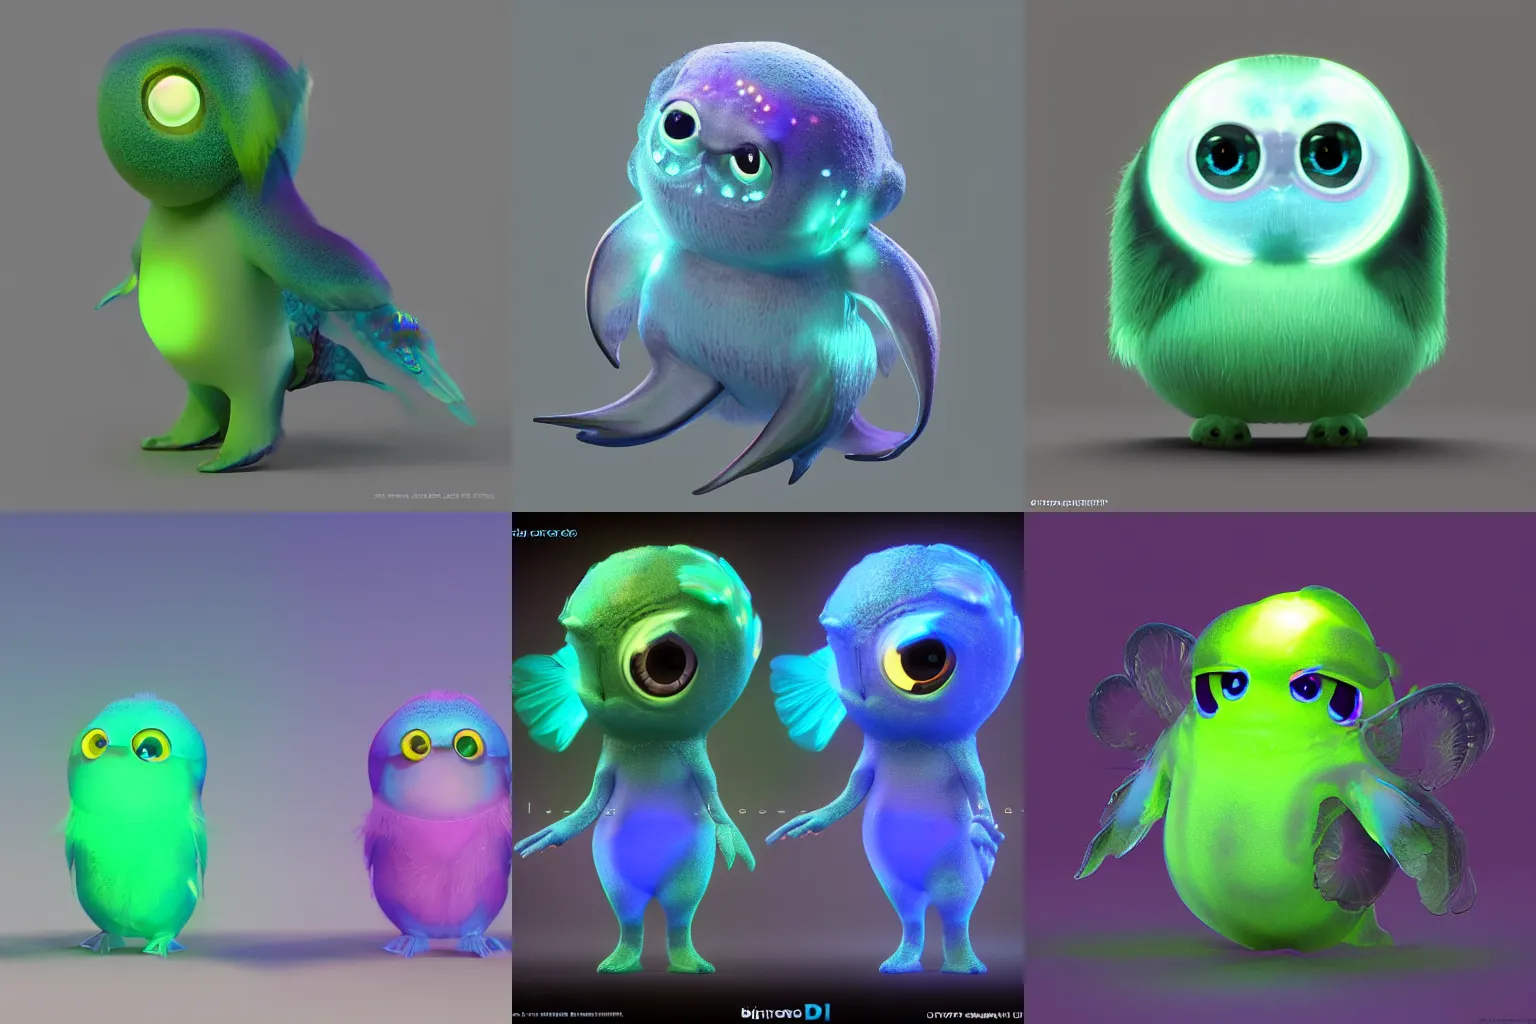 Prompt: cute! bioluminescent translucent c4d, SSS, unreal engine, pixar, Barreleye, rimlight, jelly fish dancing, fighting, bioluminescent screaming feathers pictoplasma characterdesign toydesign toy monster bird of paradise creature, zbrush, octane, hardsurface modelling, artstation, cg society, by greg rutkowksi, by Eddie Mendoza, by Peter mohrbacher, by tooth wu